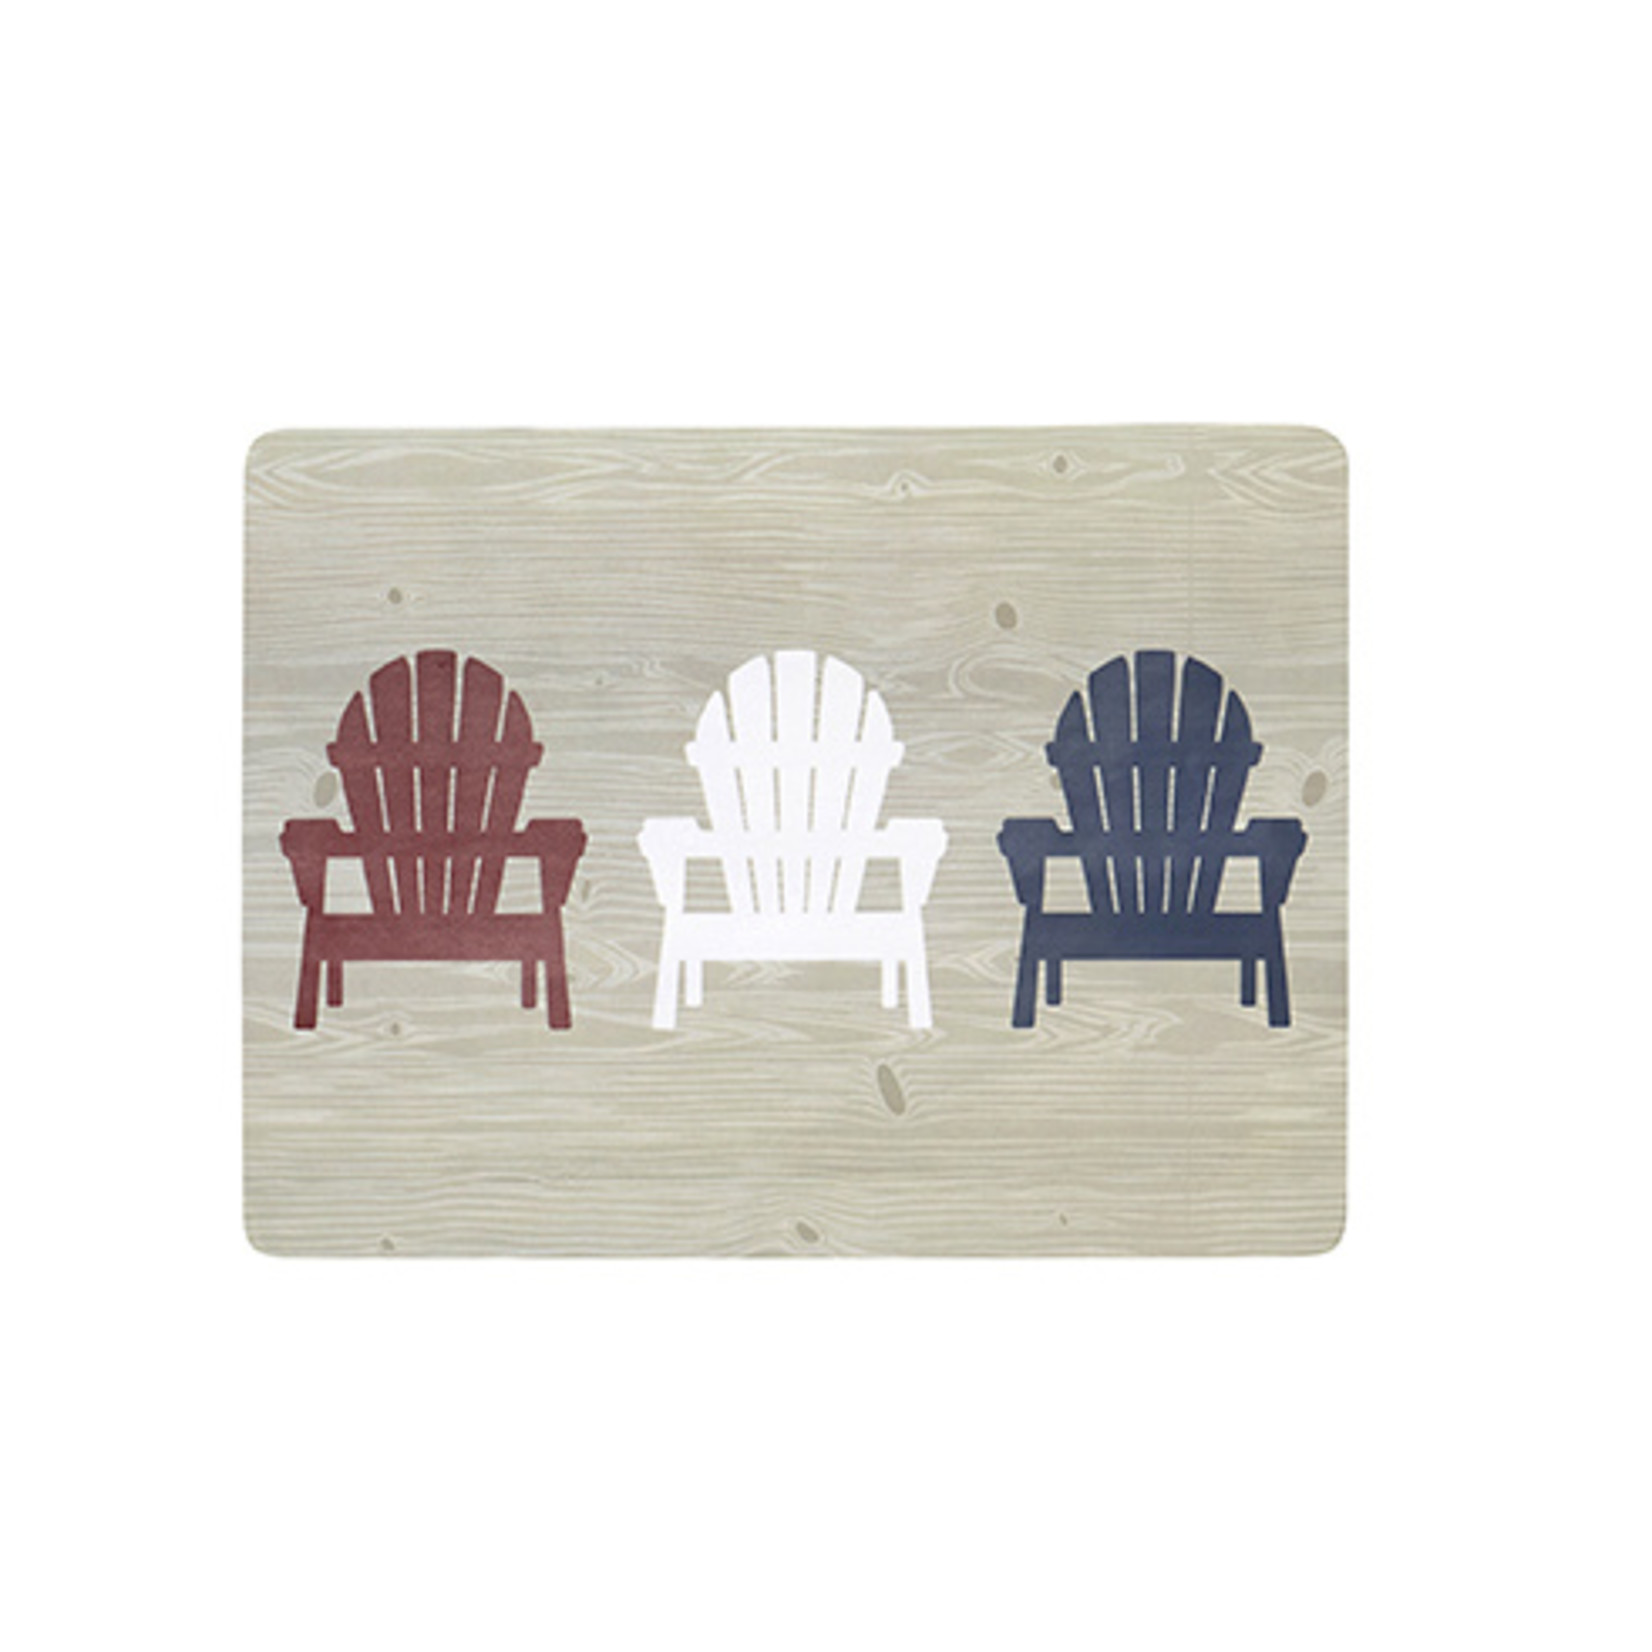 Muskoka Chair Cork Backed Placemat S/4